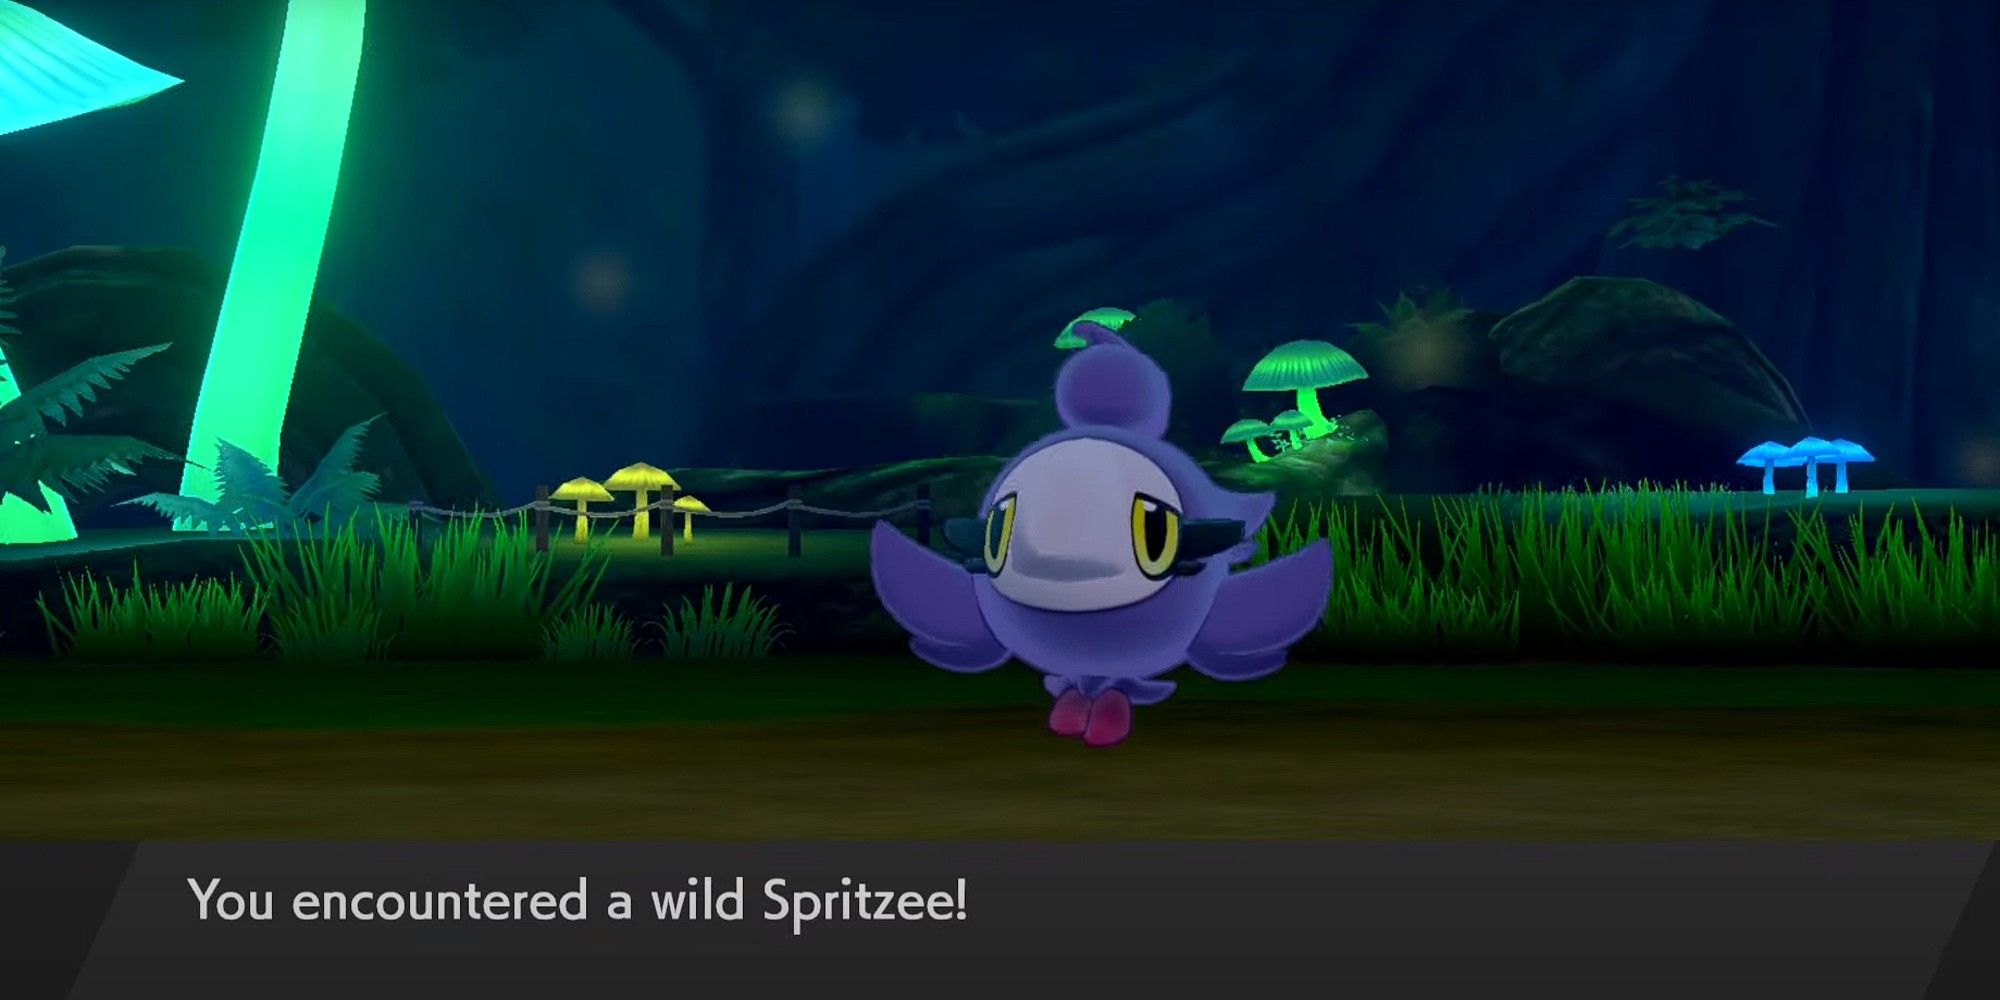 How to Find (& Catch) Spritzee in Pokémon Sword and Shield